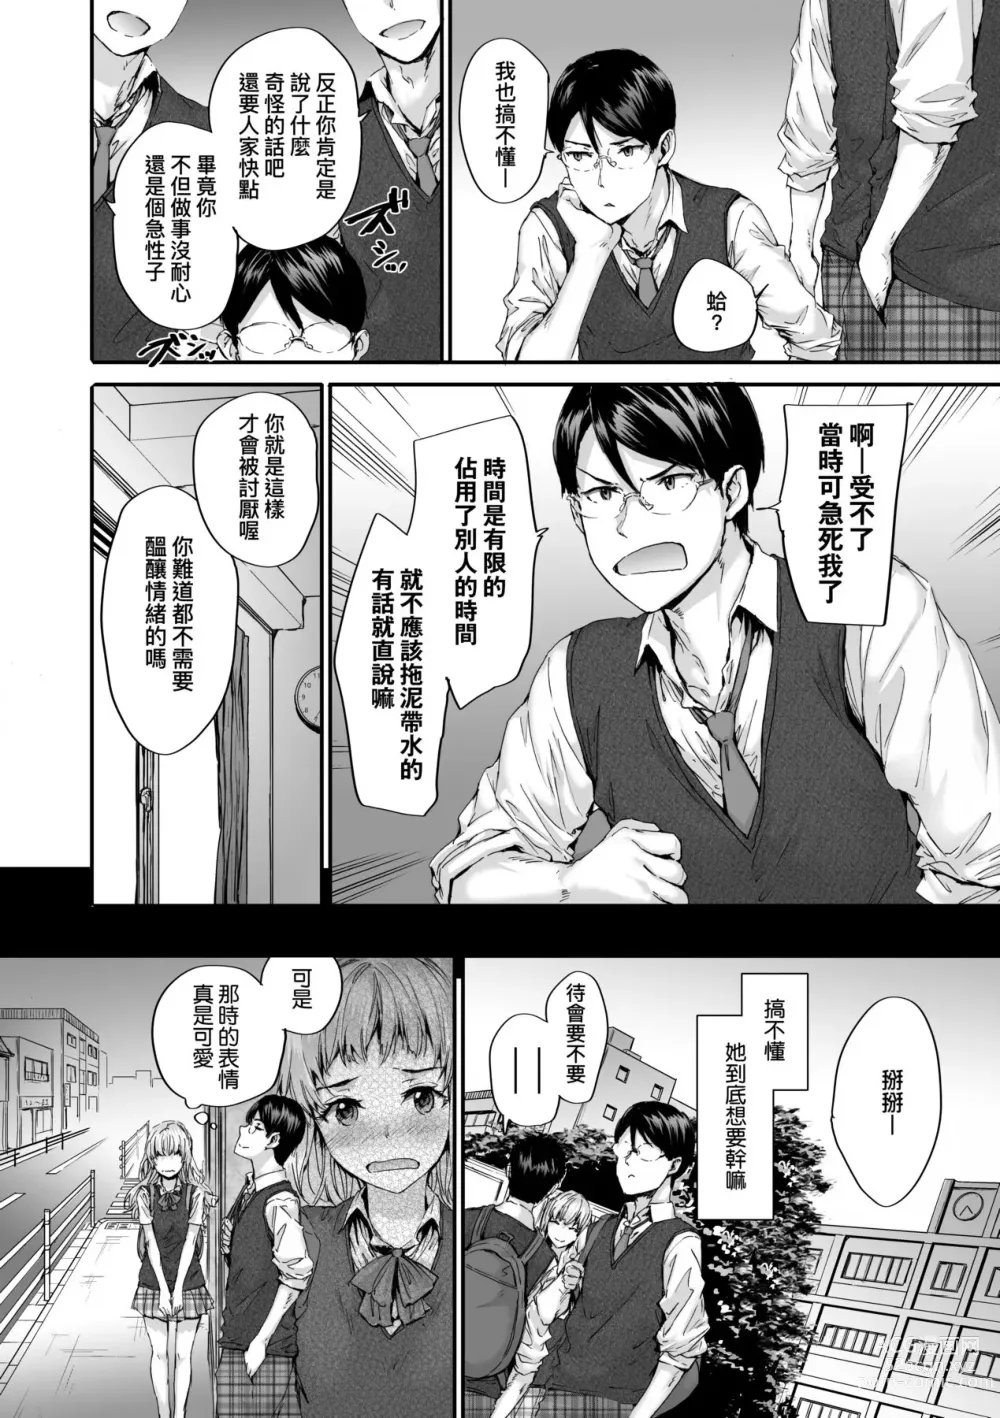 Page 4 of doujinshi Say you love me with your mouth